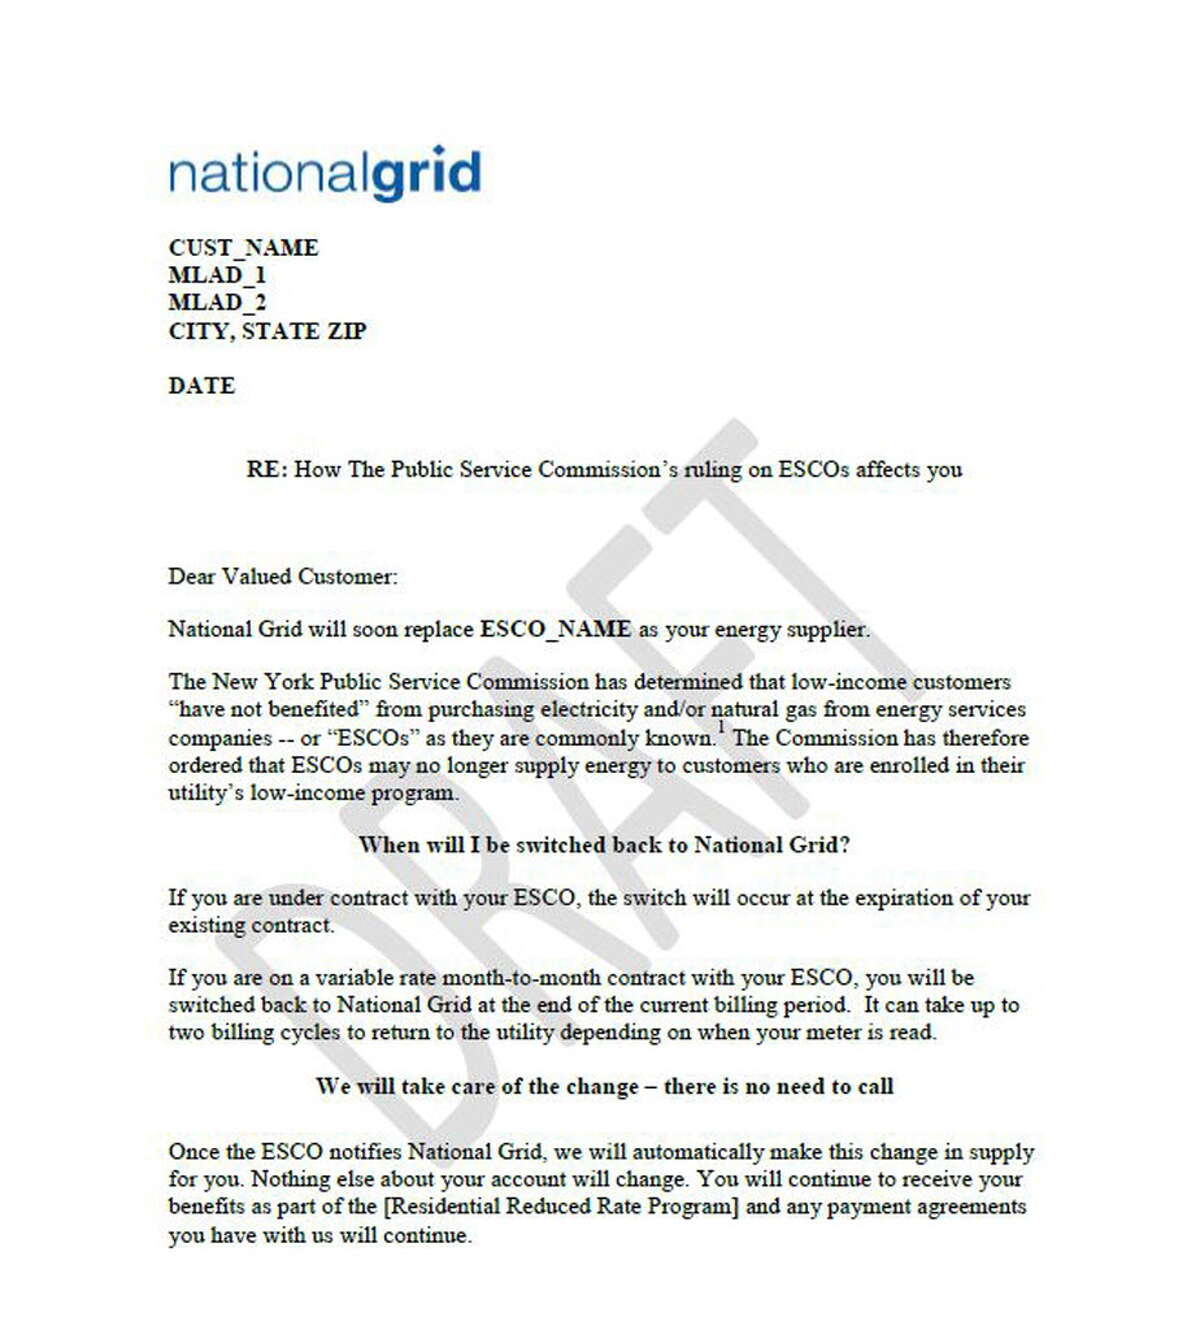 A sample letter sent out by National Grid to customers regarding alternative energy suppliers and the state's regulatory action against them. A court ruling has blocked the letters taking effect.